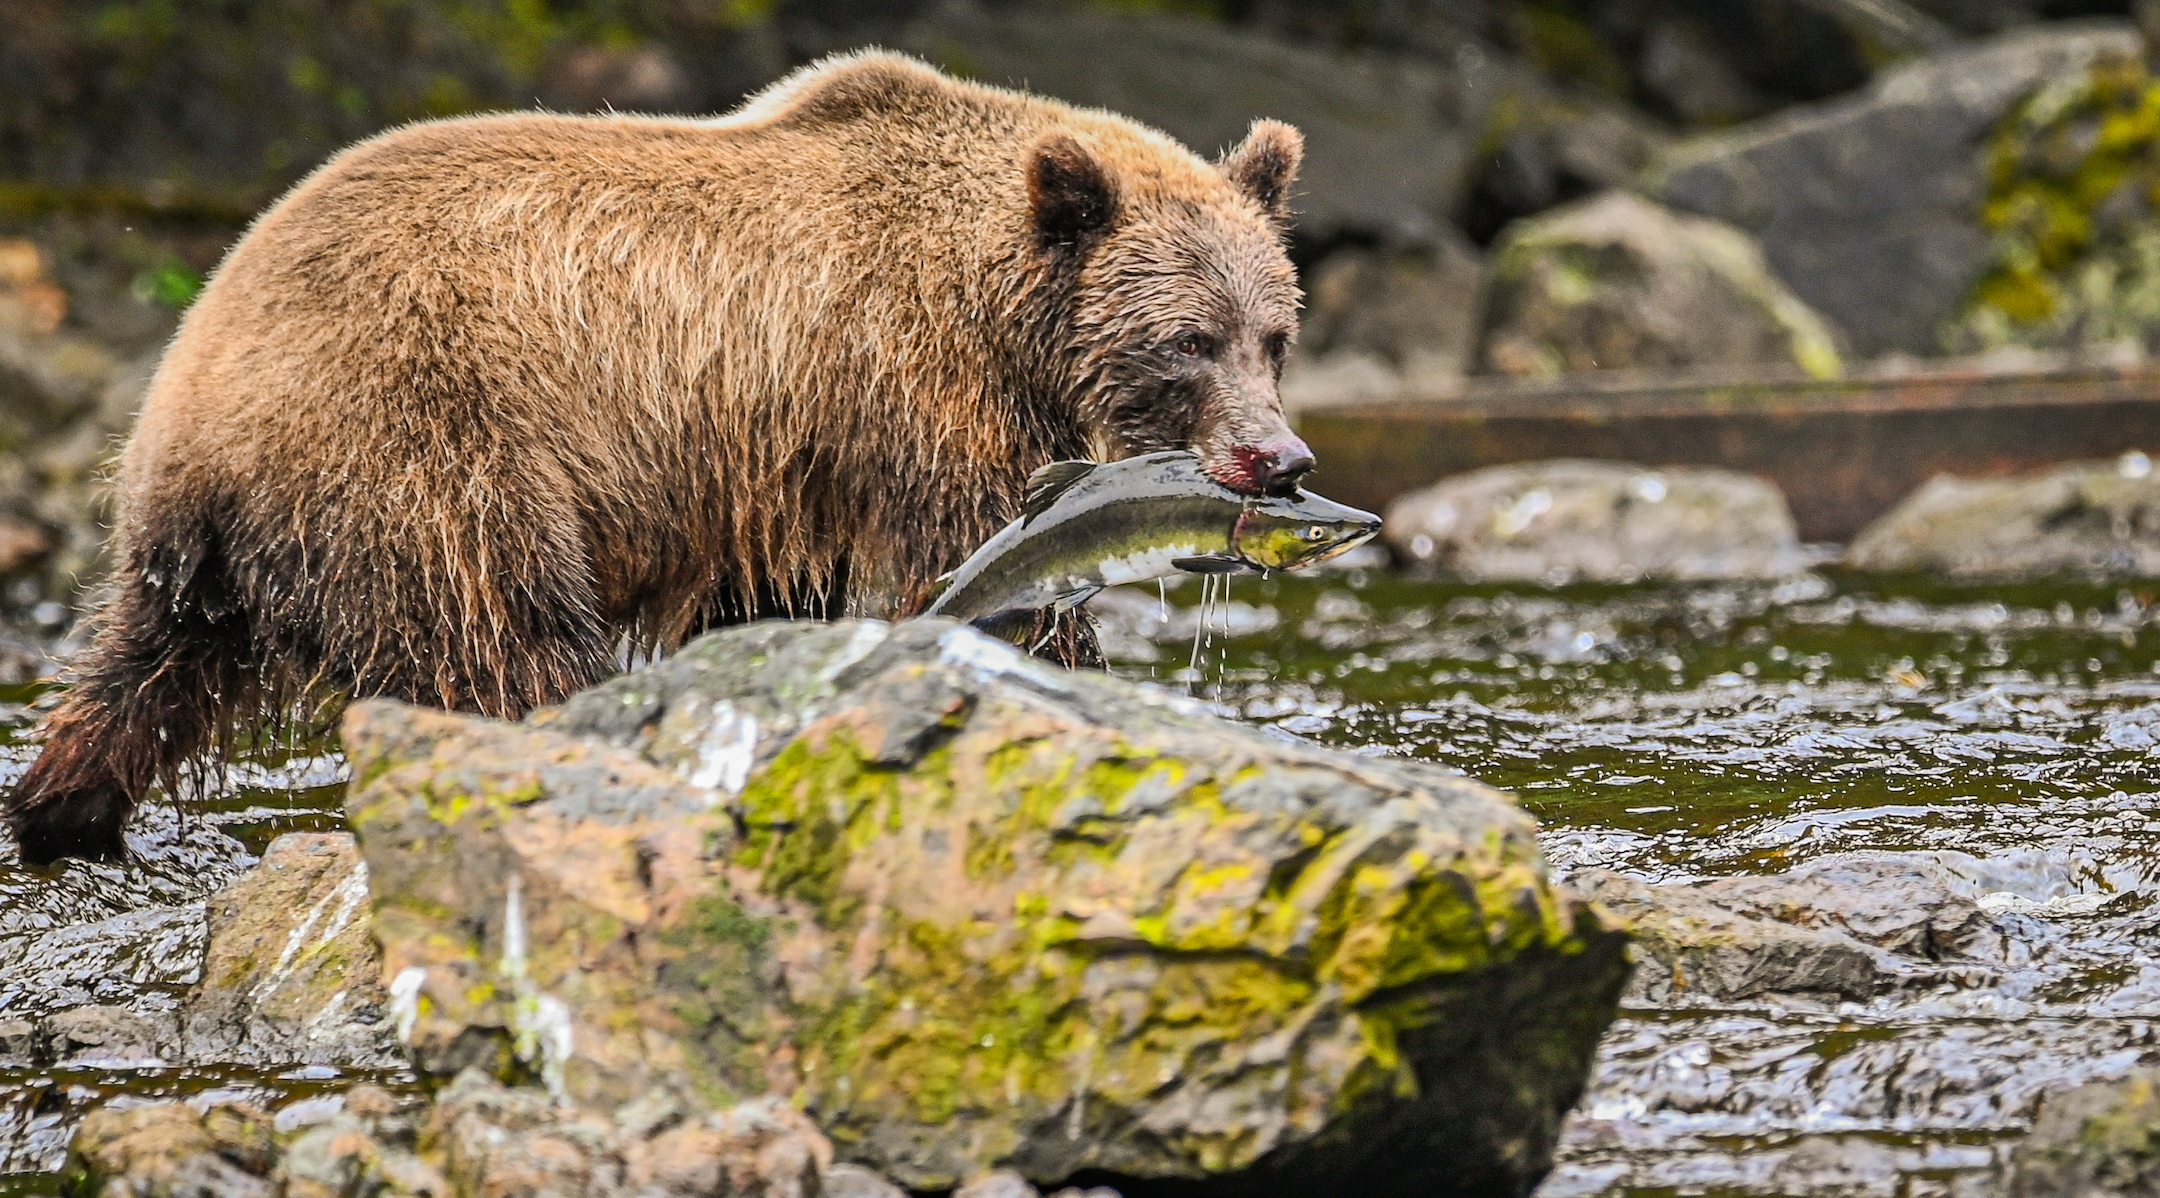 Grizzly bear in water holding a fish